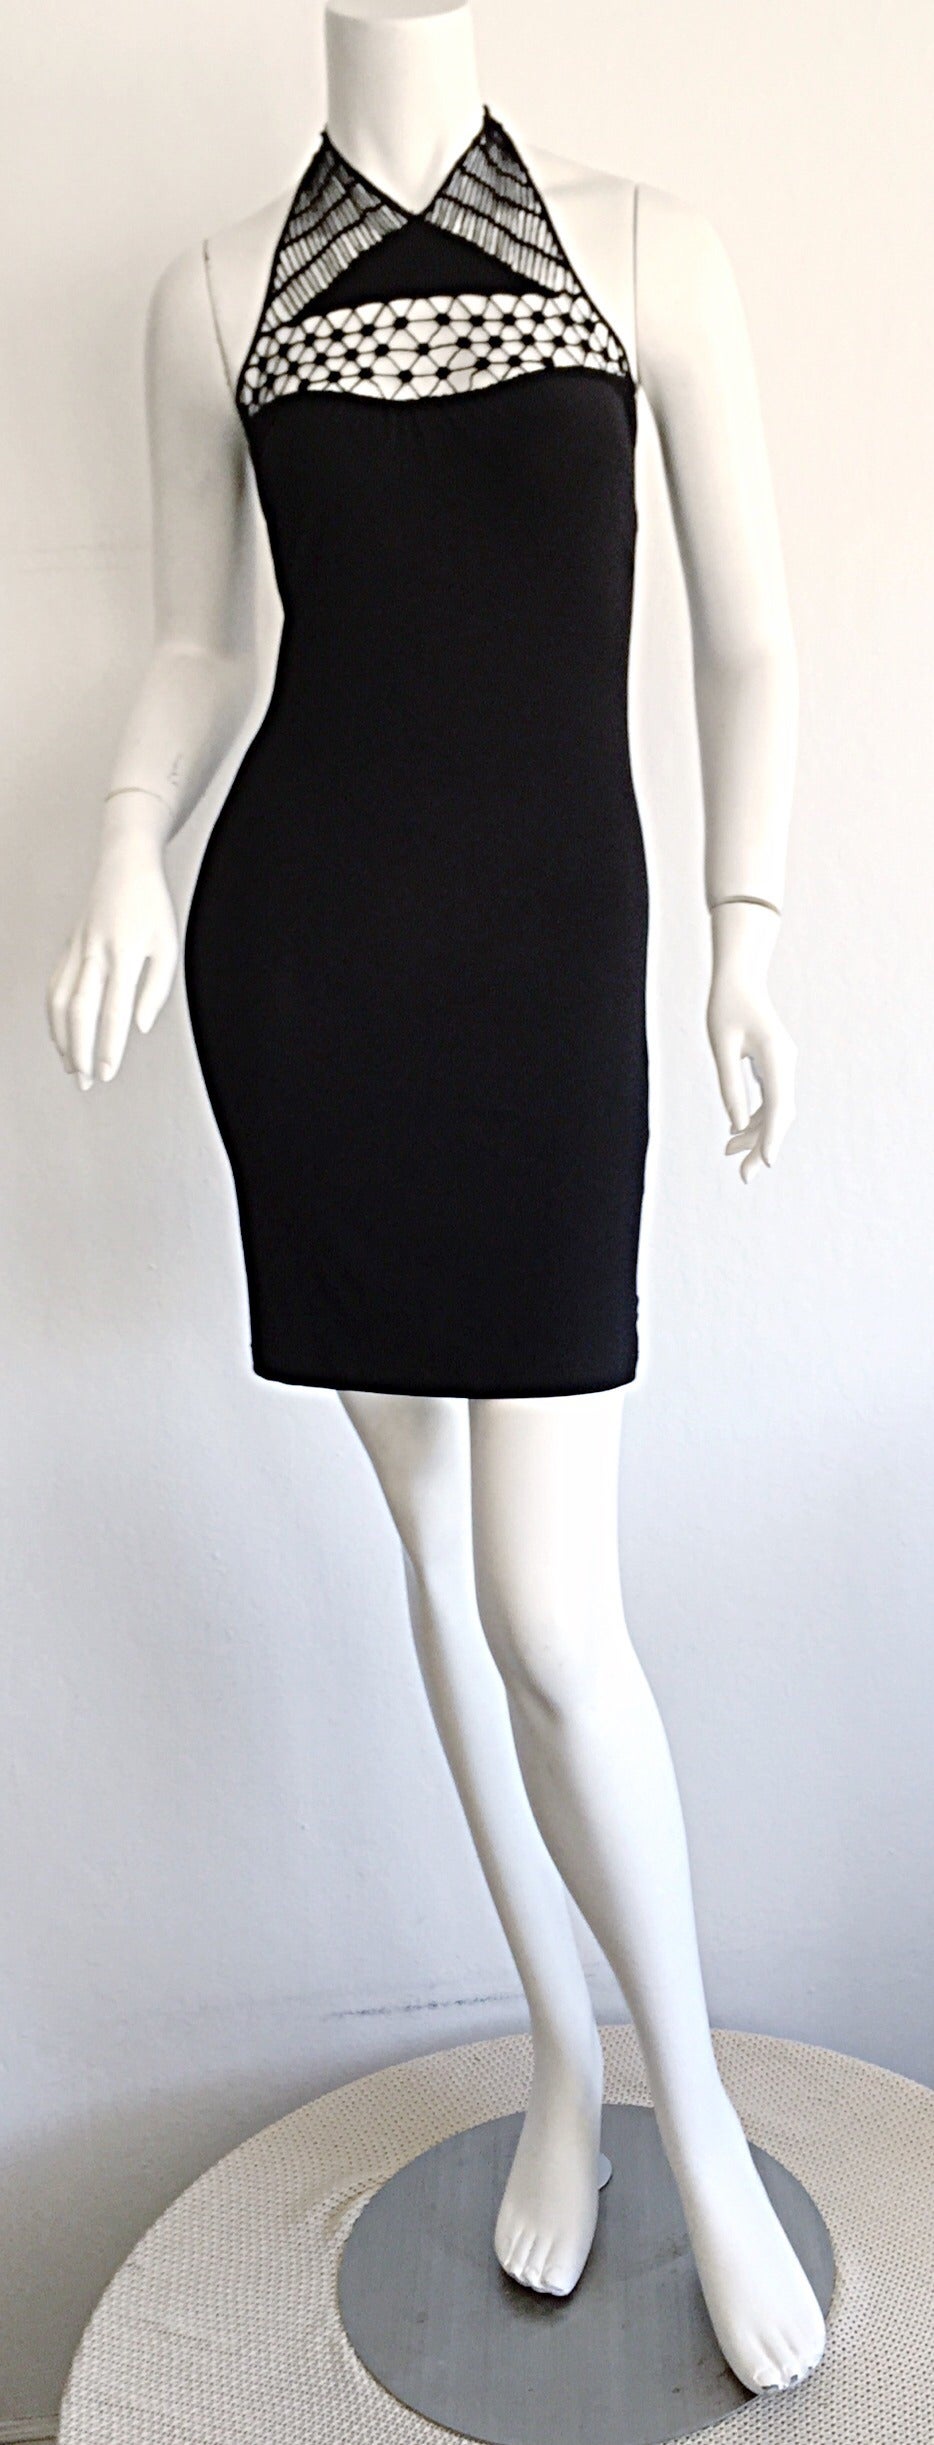 Sexy vintage Gianni Versace little black bondage dress! Features crochet cut-out at neck, with halter ties. Extremely flattering fit, with lots of stretch! Made in Italy. In great condition. Approximately Size Small-Medium (lots of